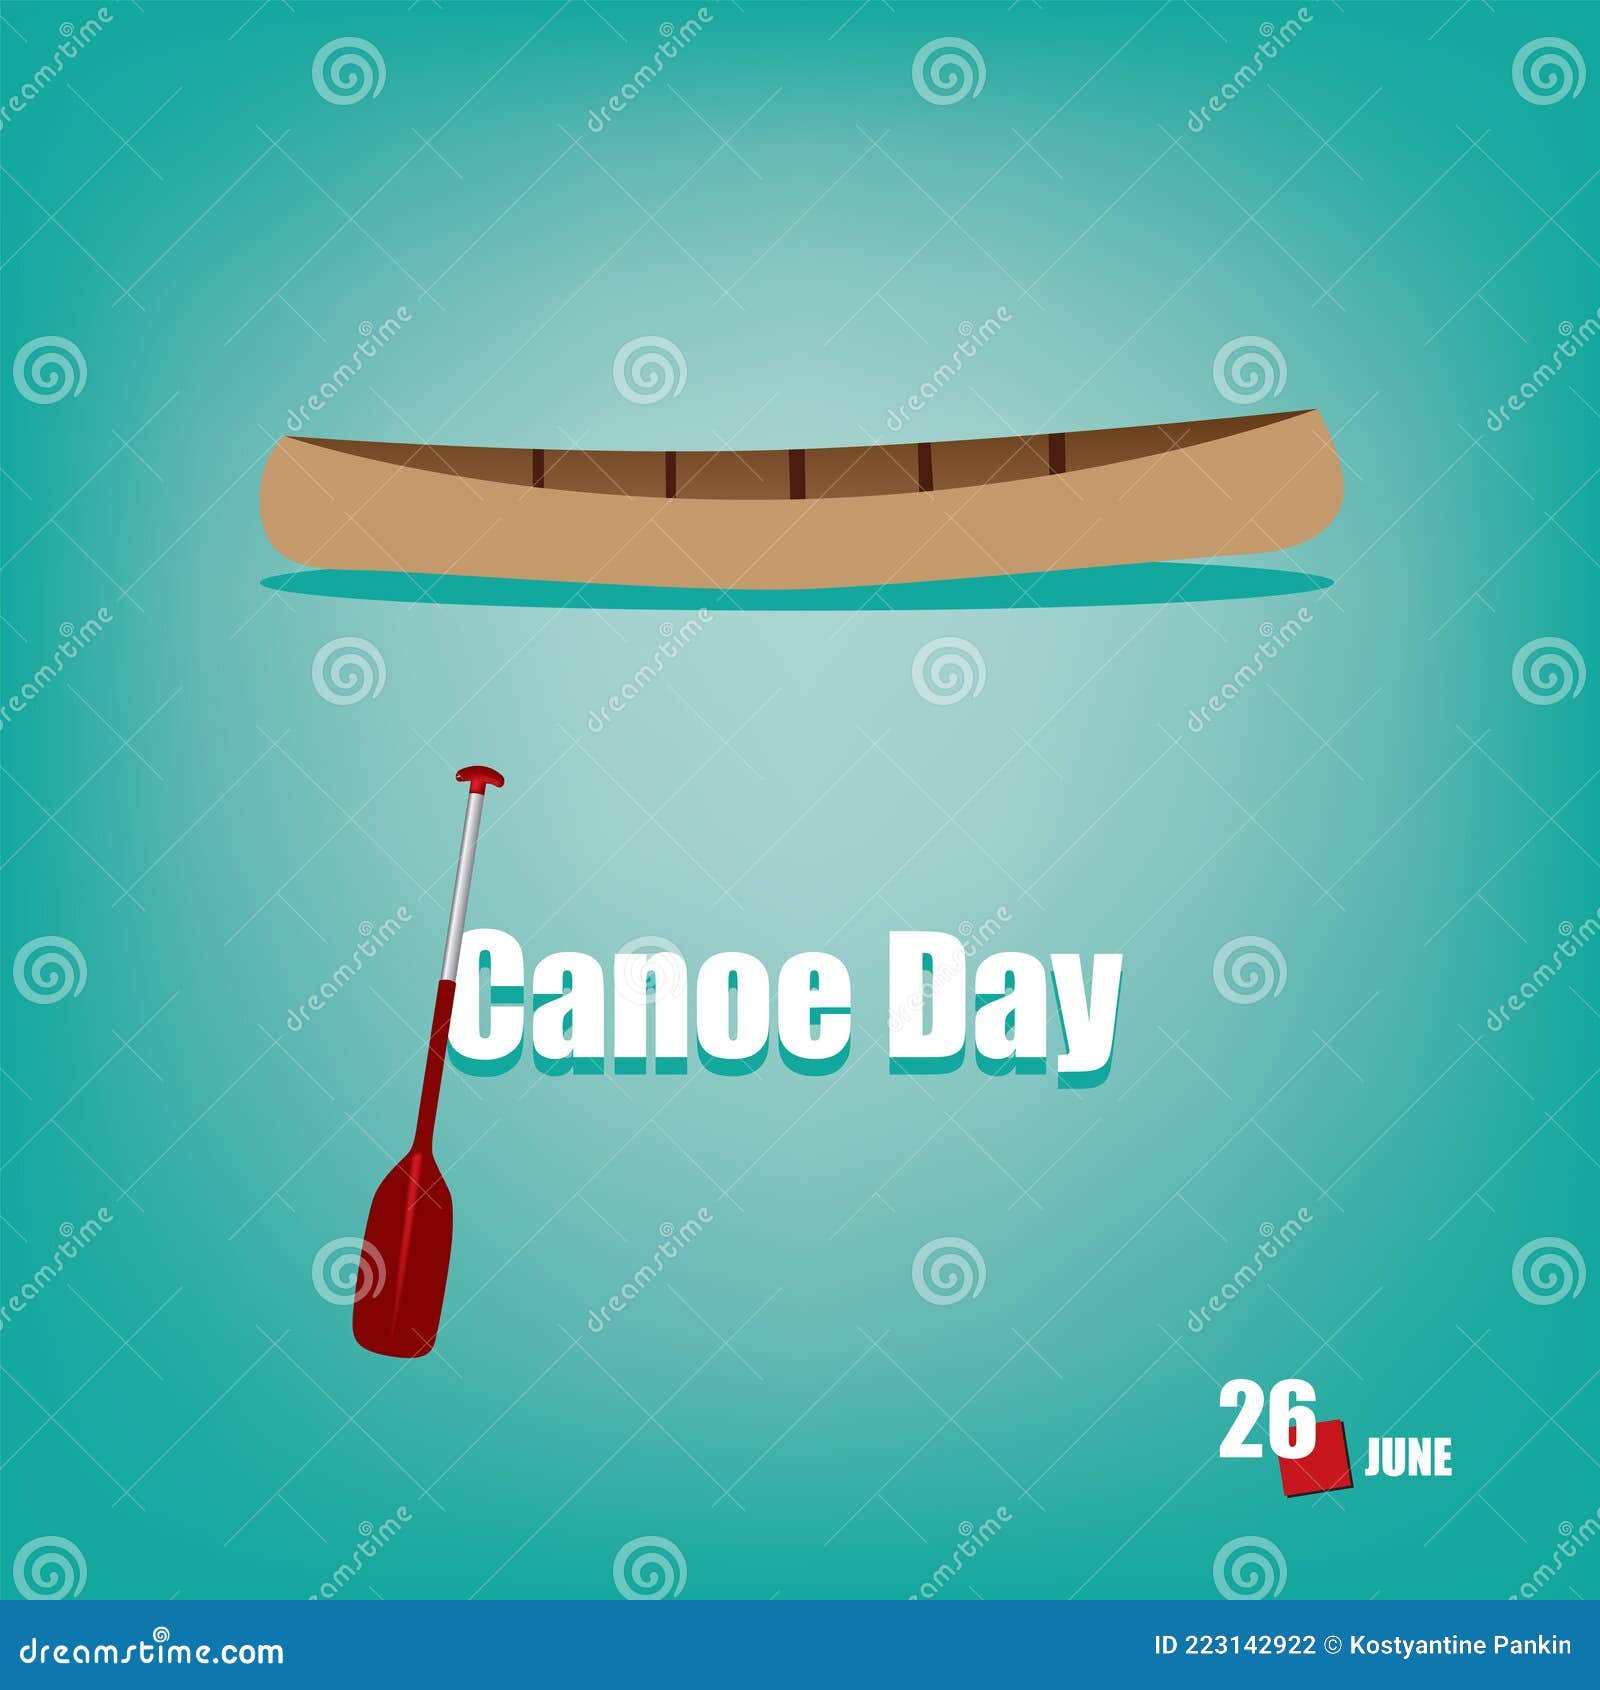 Happy Canoe Day stock vector. Illustration of paddle 223142922